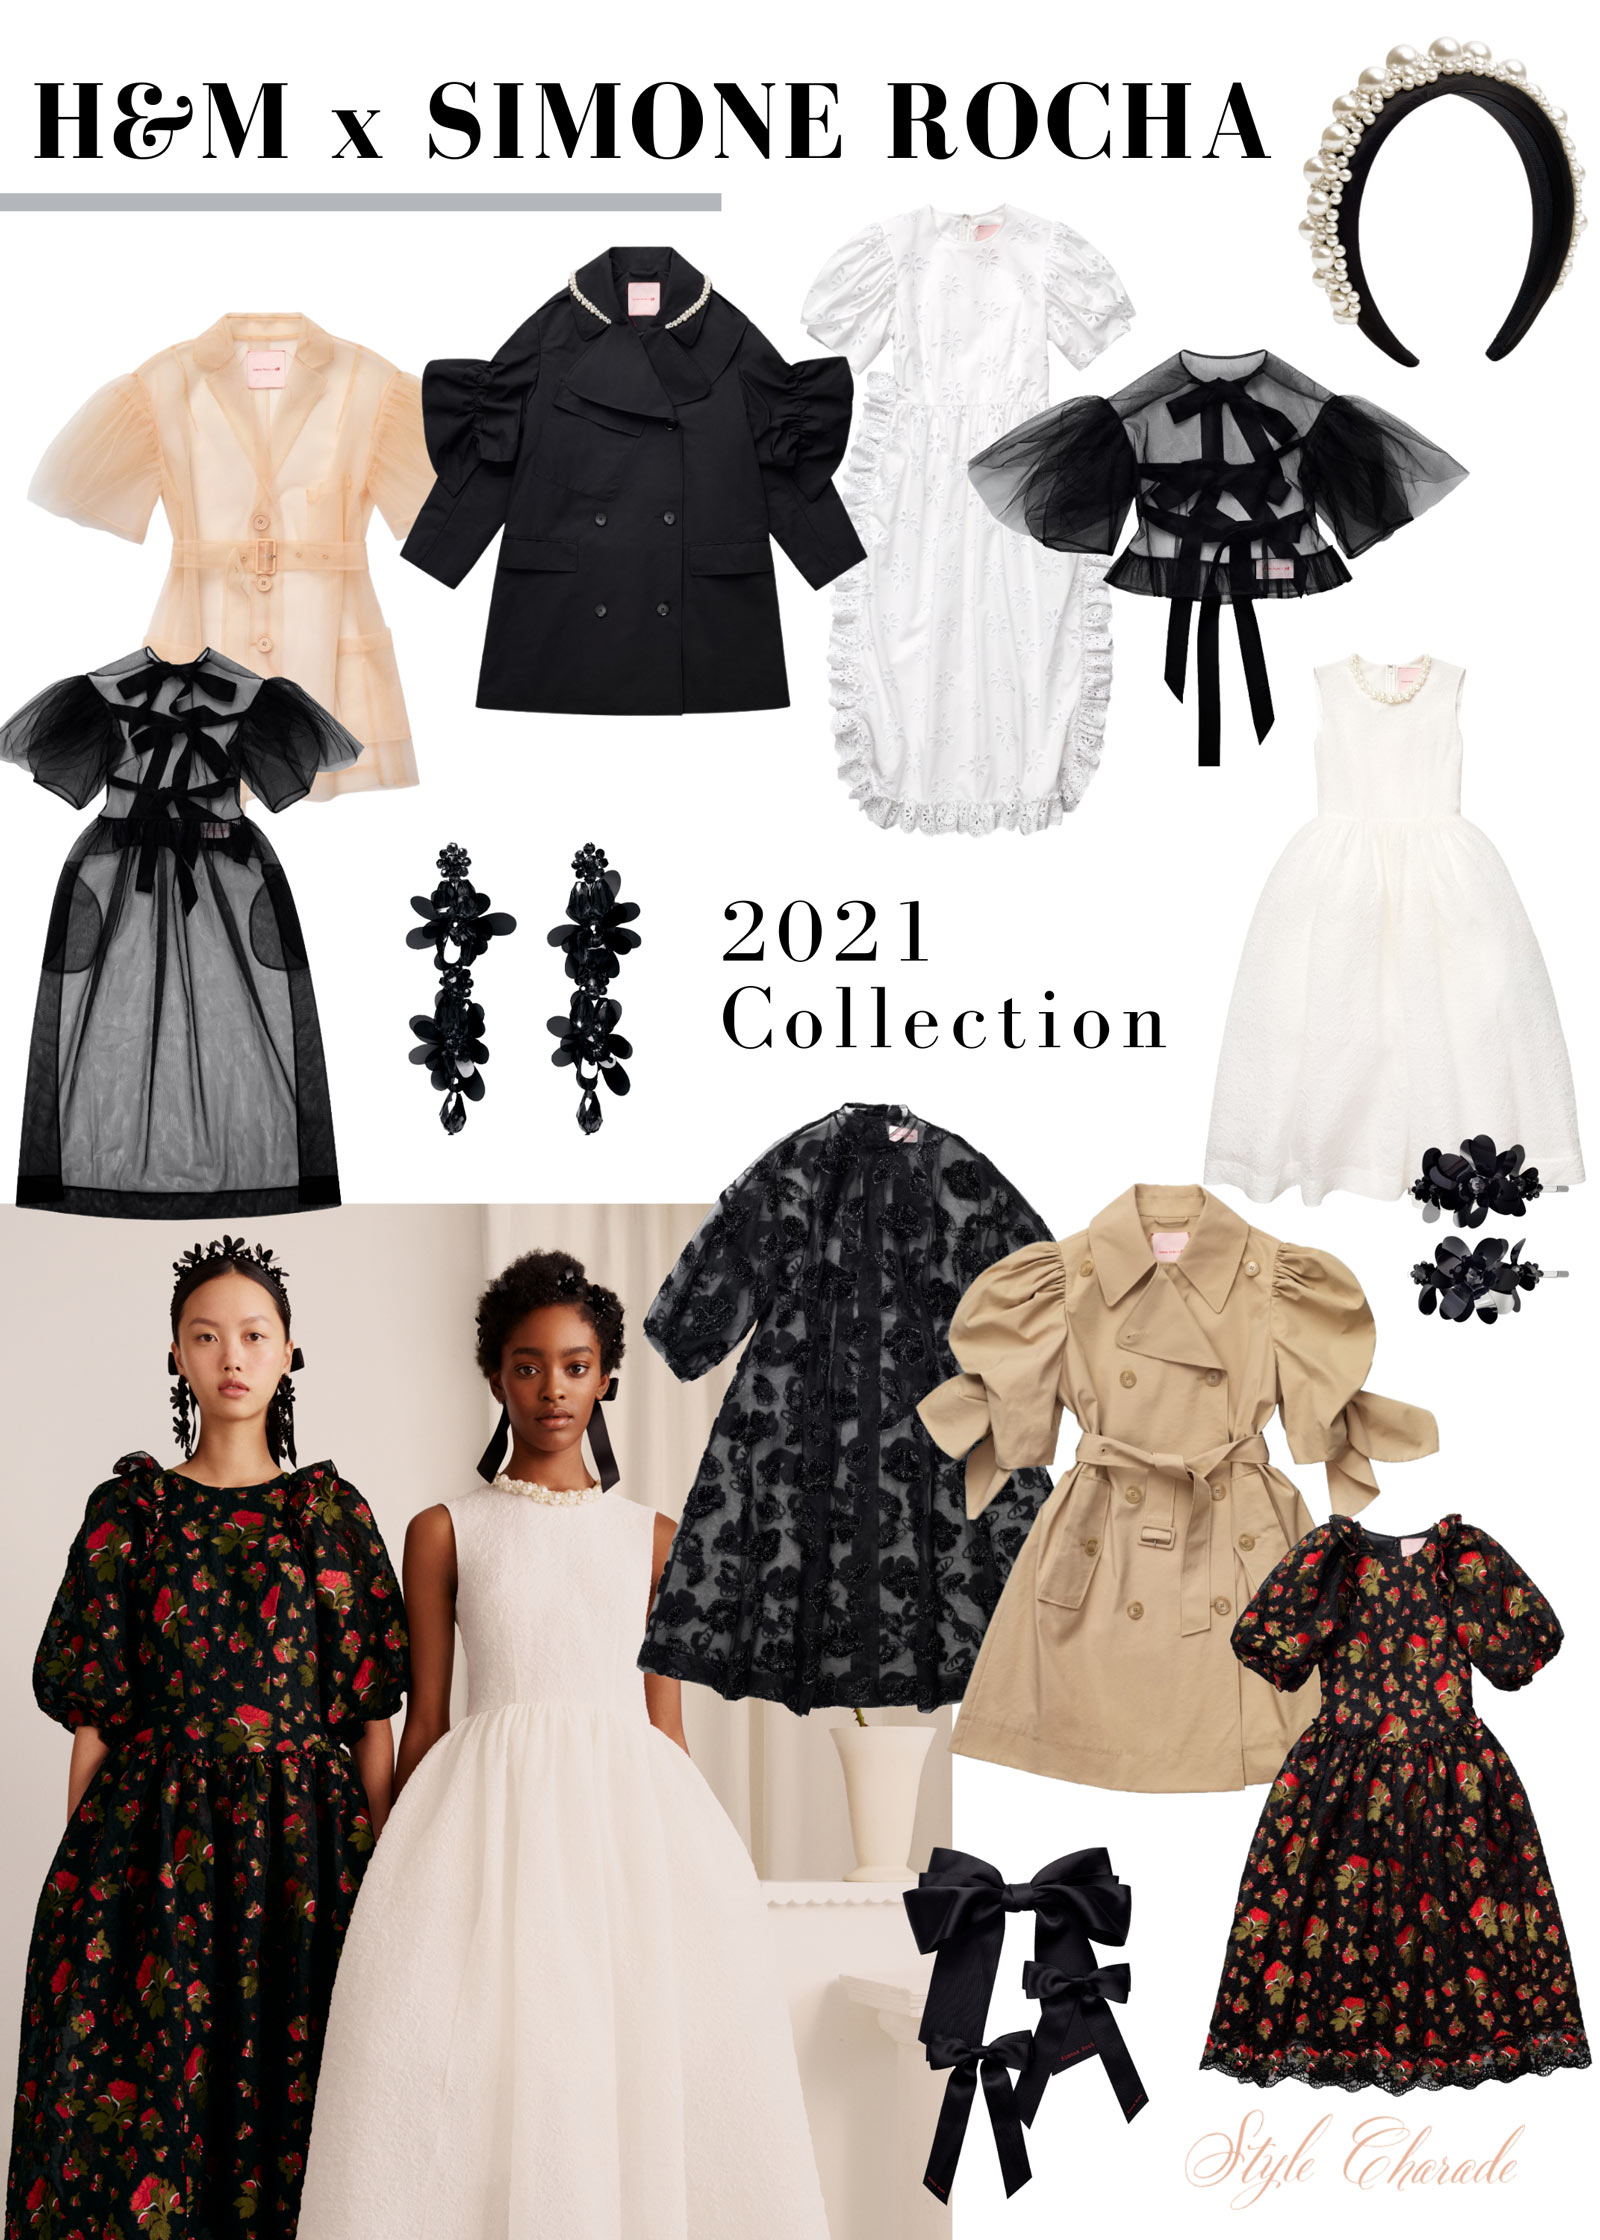 The Complete Guide to the H&M Simone Rocha Collection - Style Charade